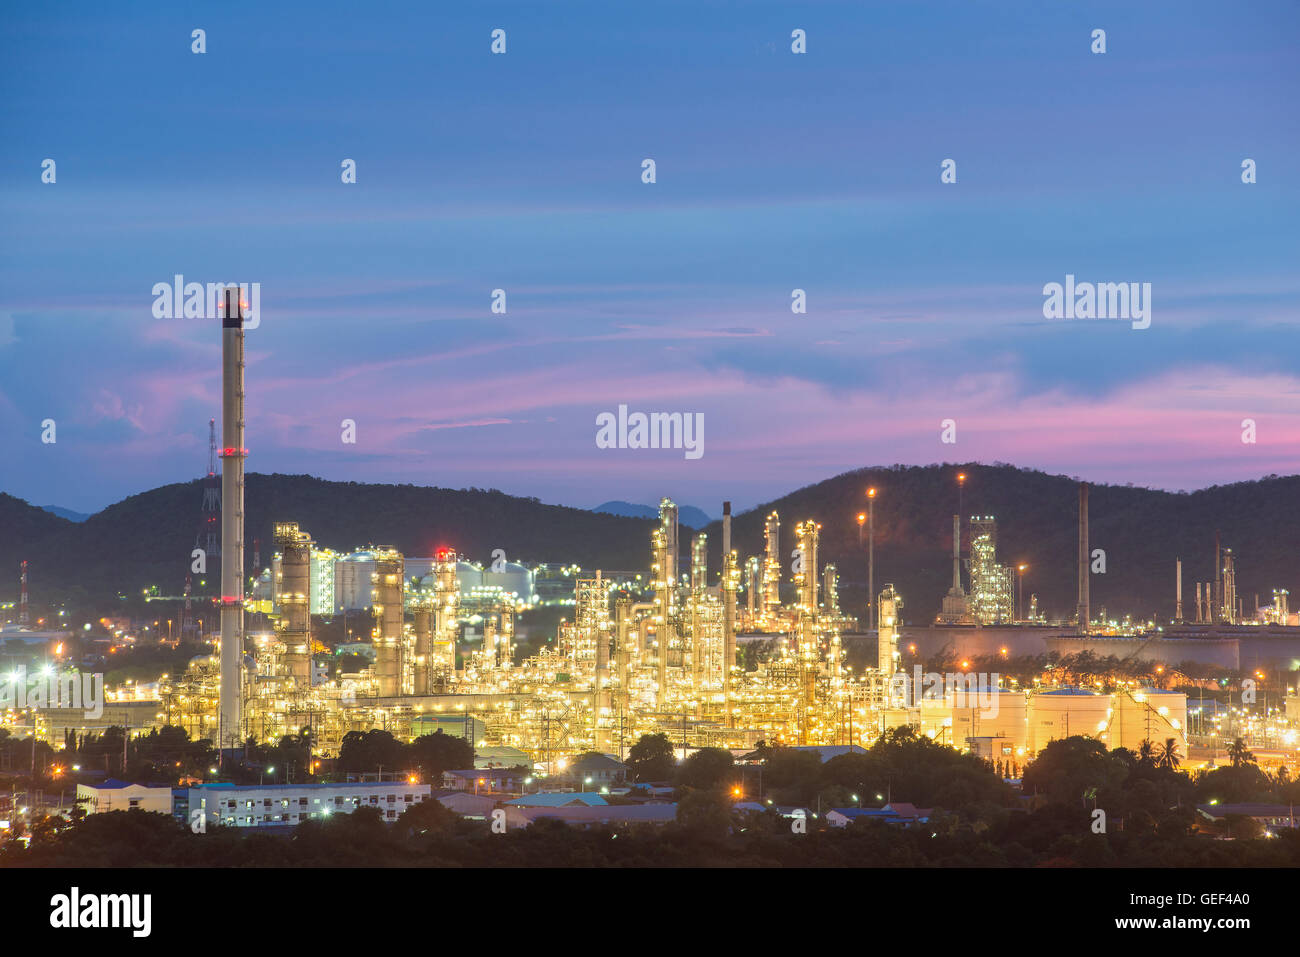 Oil refinery industry at night. Oil refinery industry in Chonburi, Thailand. Landscape of industry estate in Thailand. Stock Photo